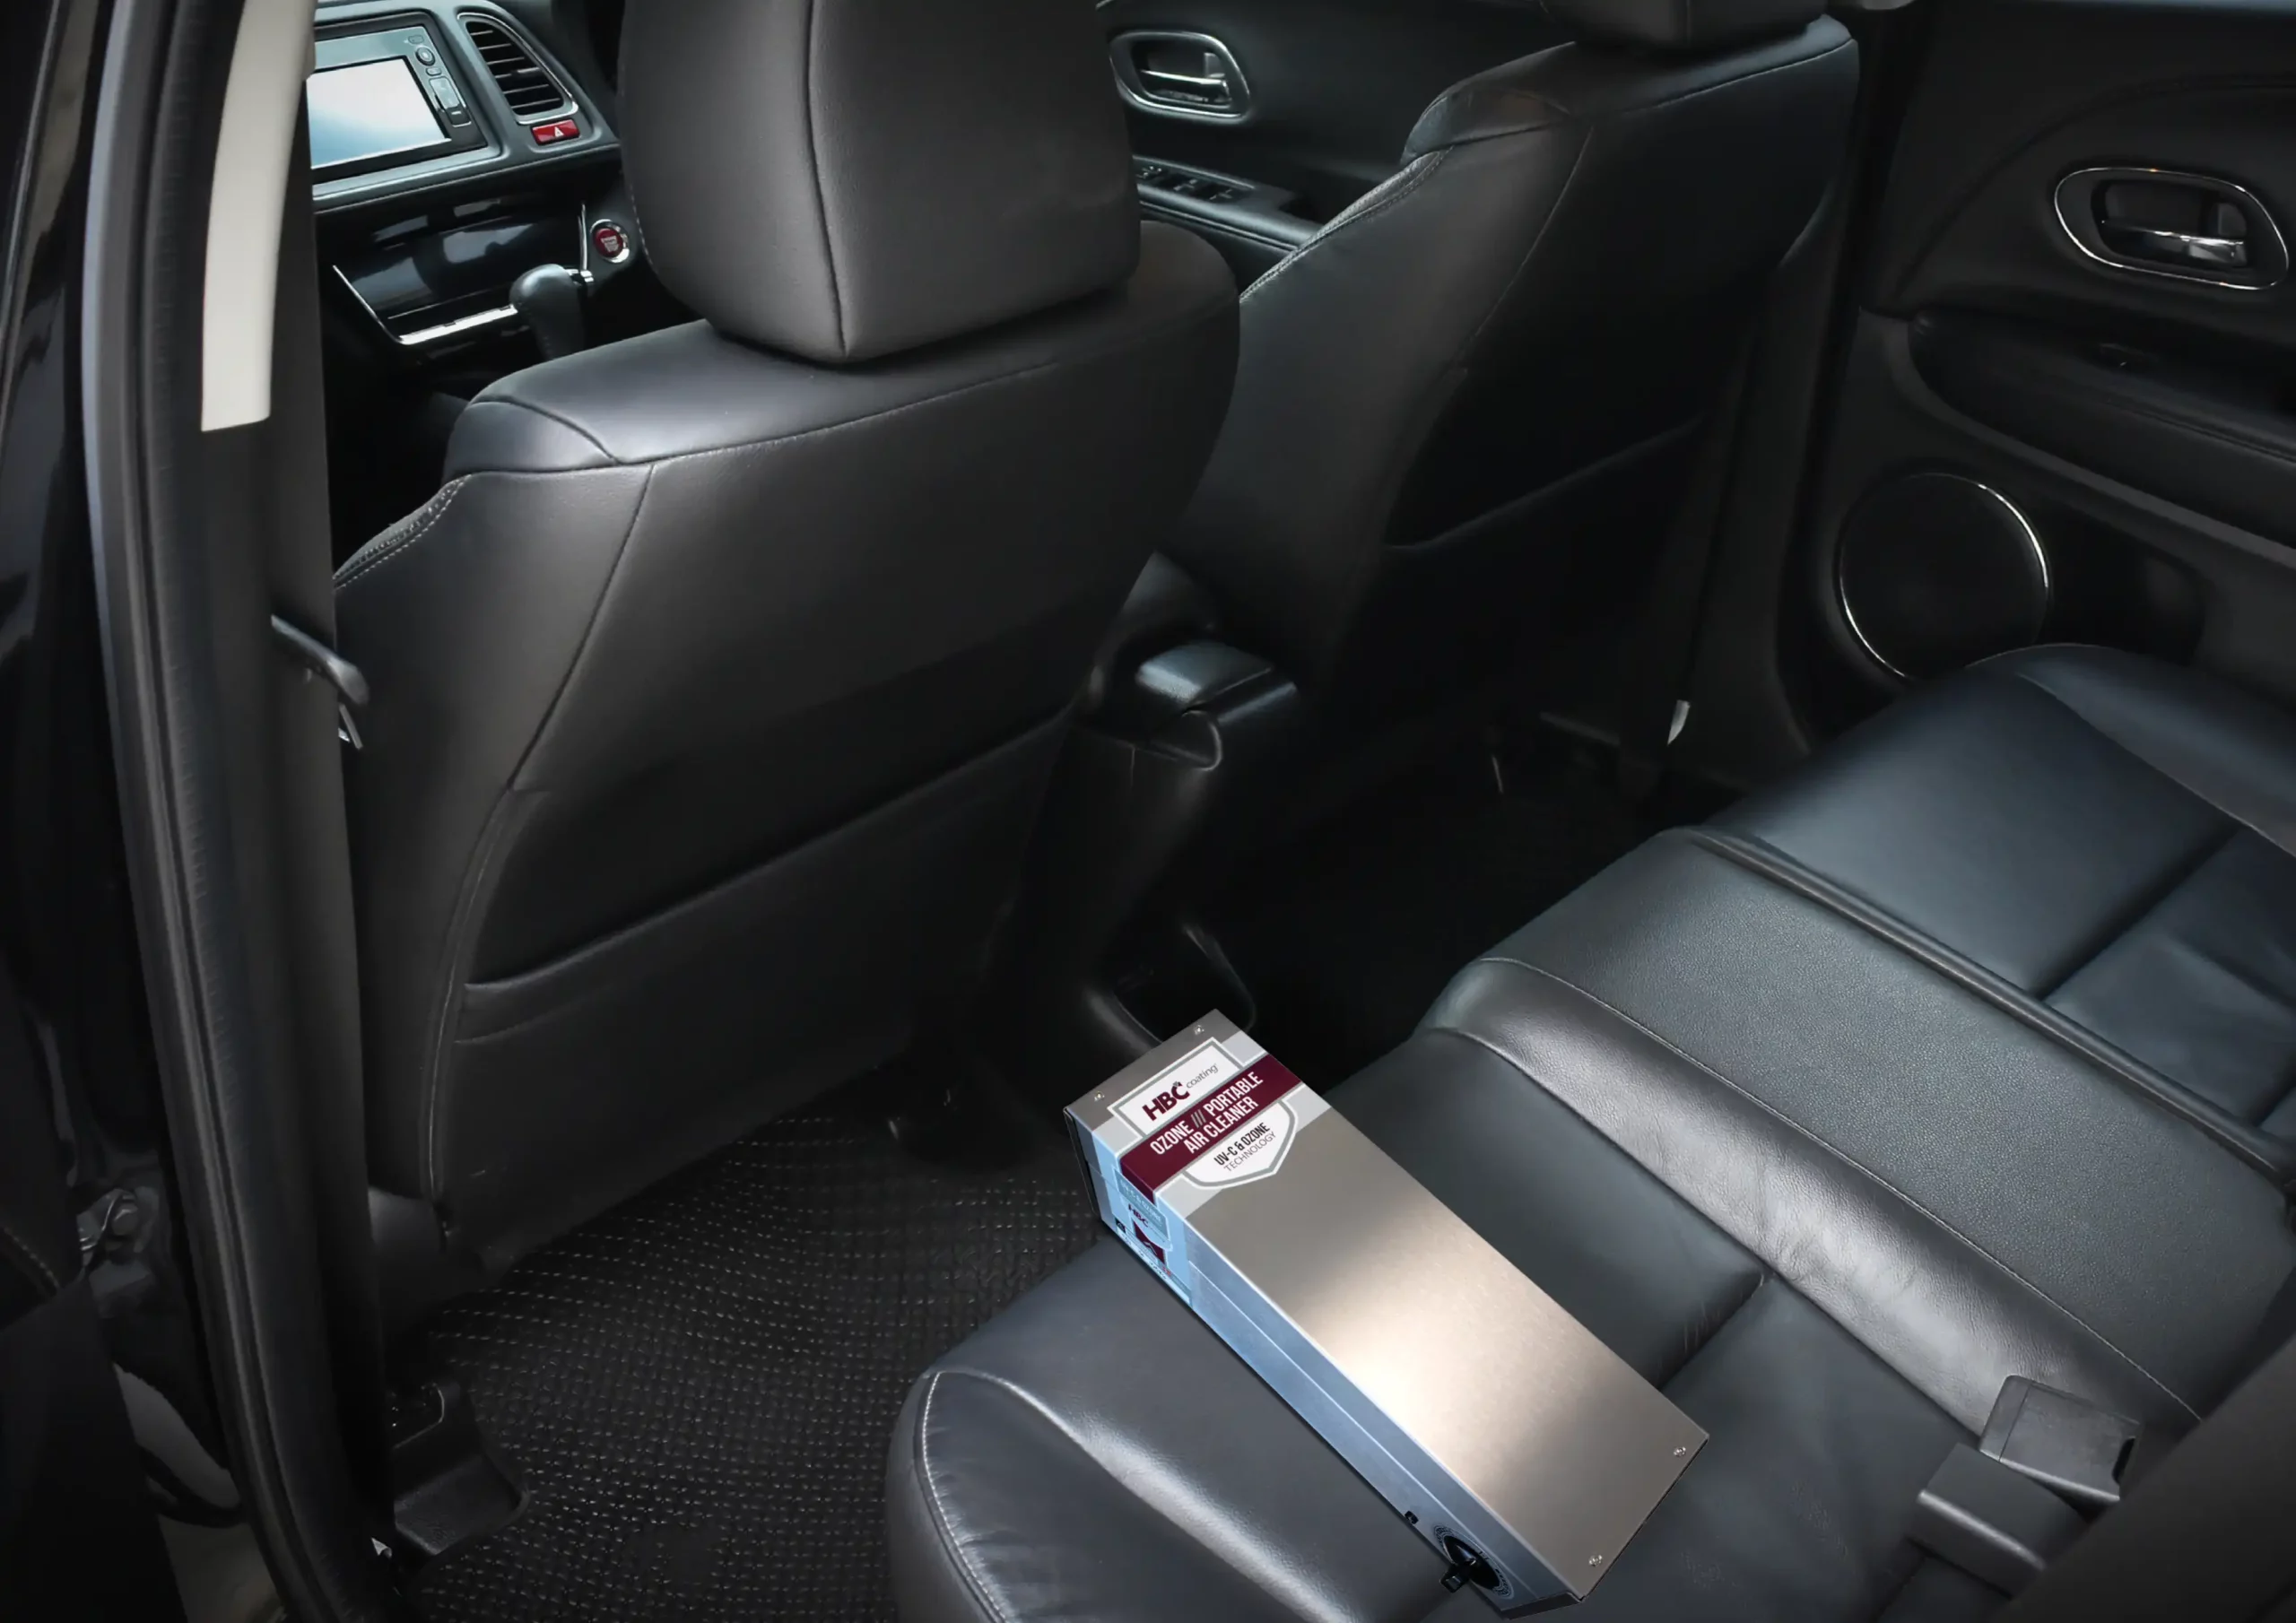 The HBC ozone air cleaner lays on the backseats in the car cabin.